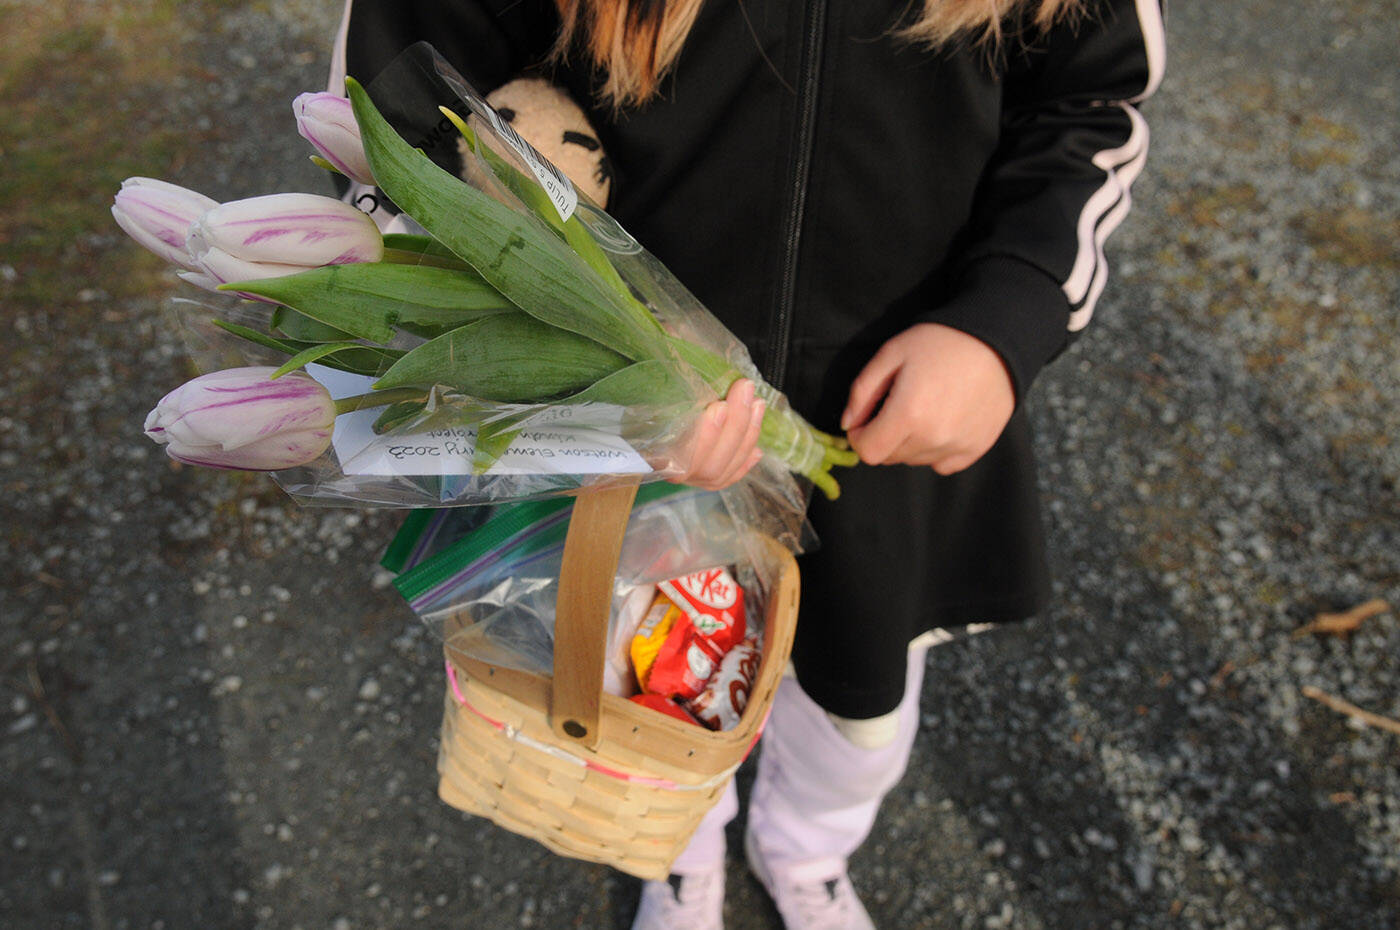 One student brought her own basket to carry goodies for Watson Elementary’s Kindness Project on Wednesday, March 15, 2023. (Jenna Hauck/ Chilliwack Progress)